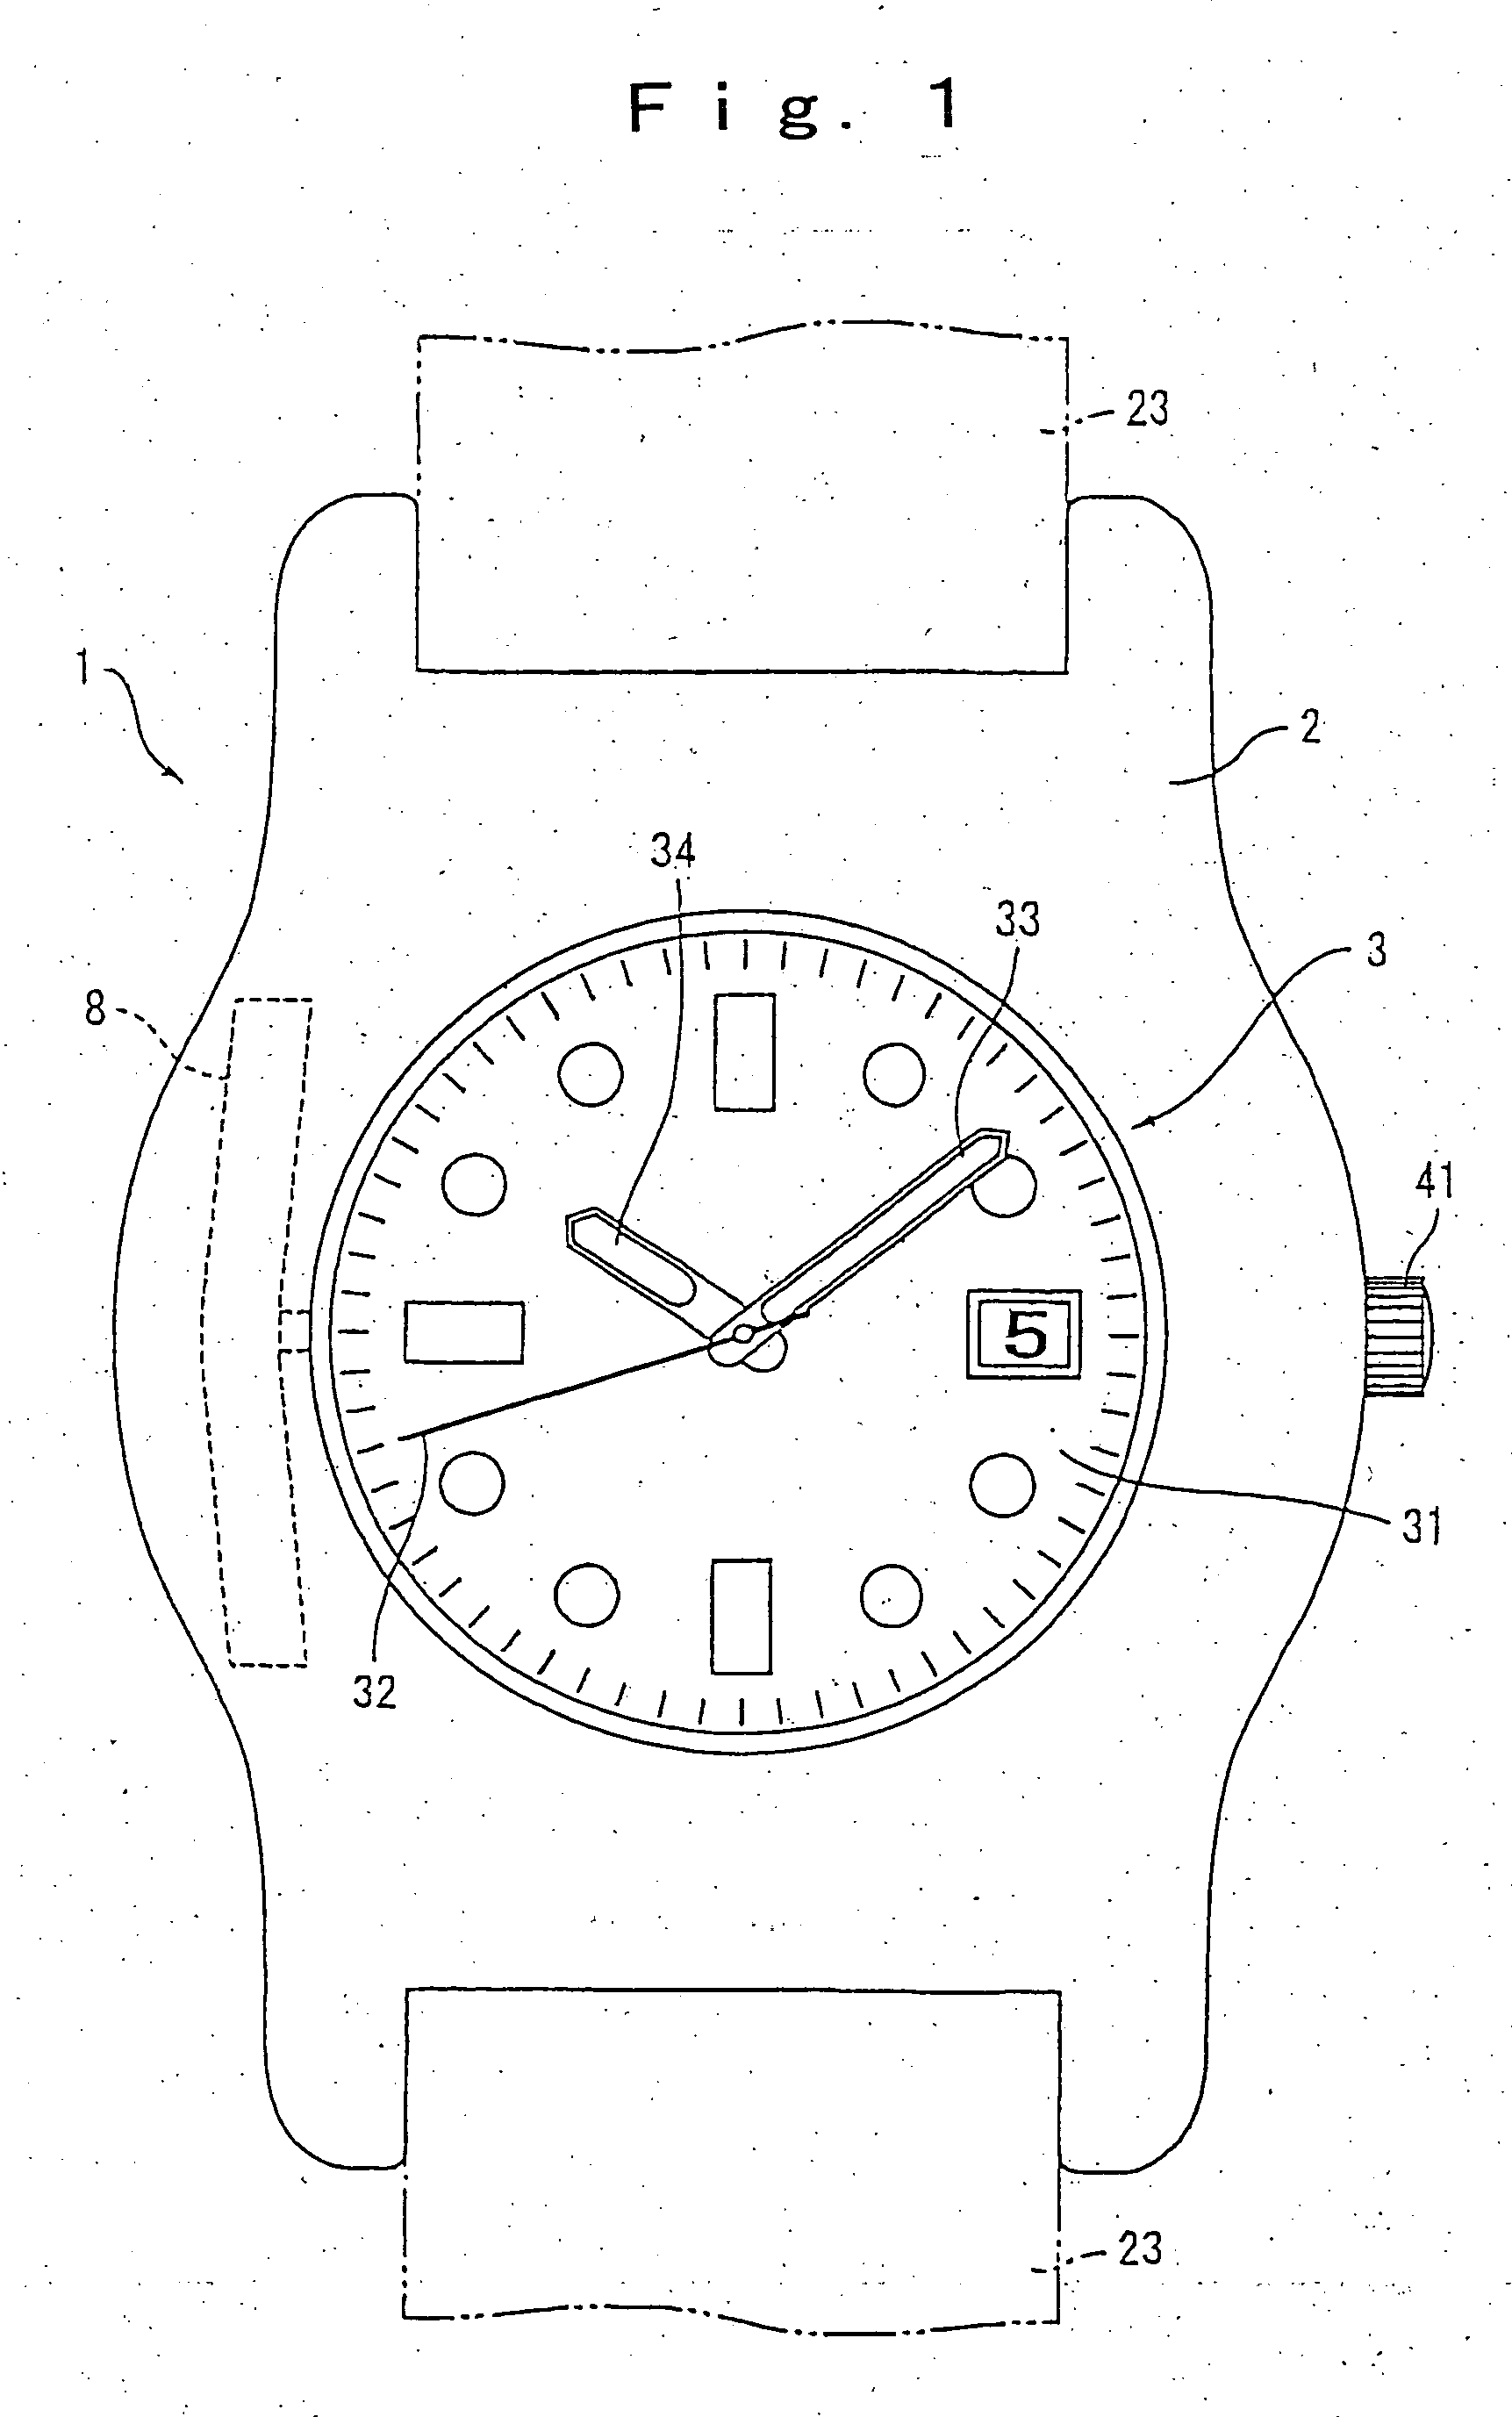 Electronic timepiece and electronic apparatus